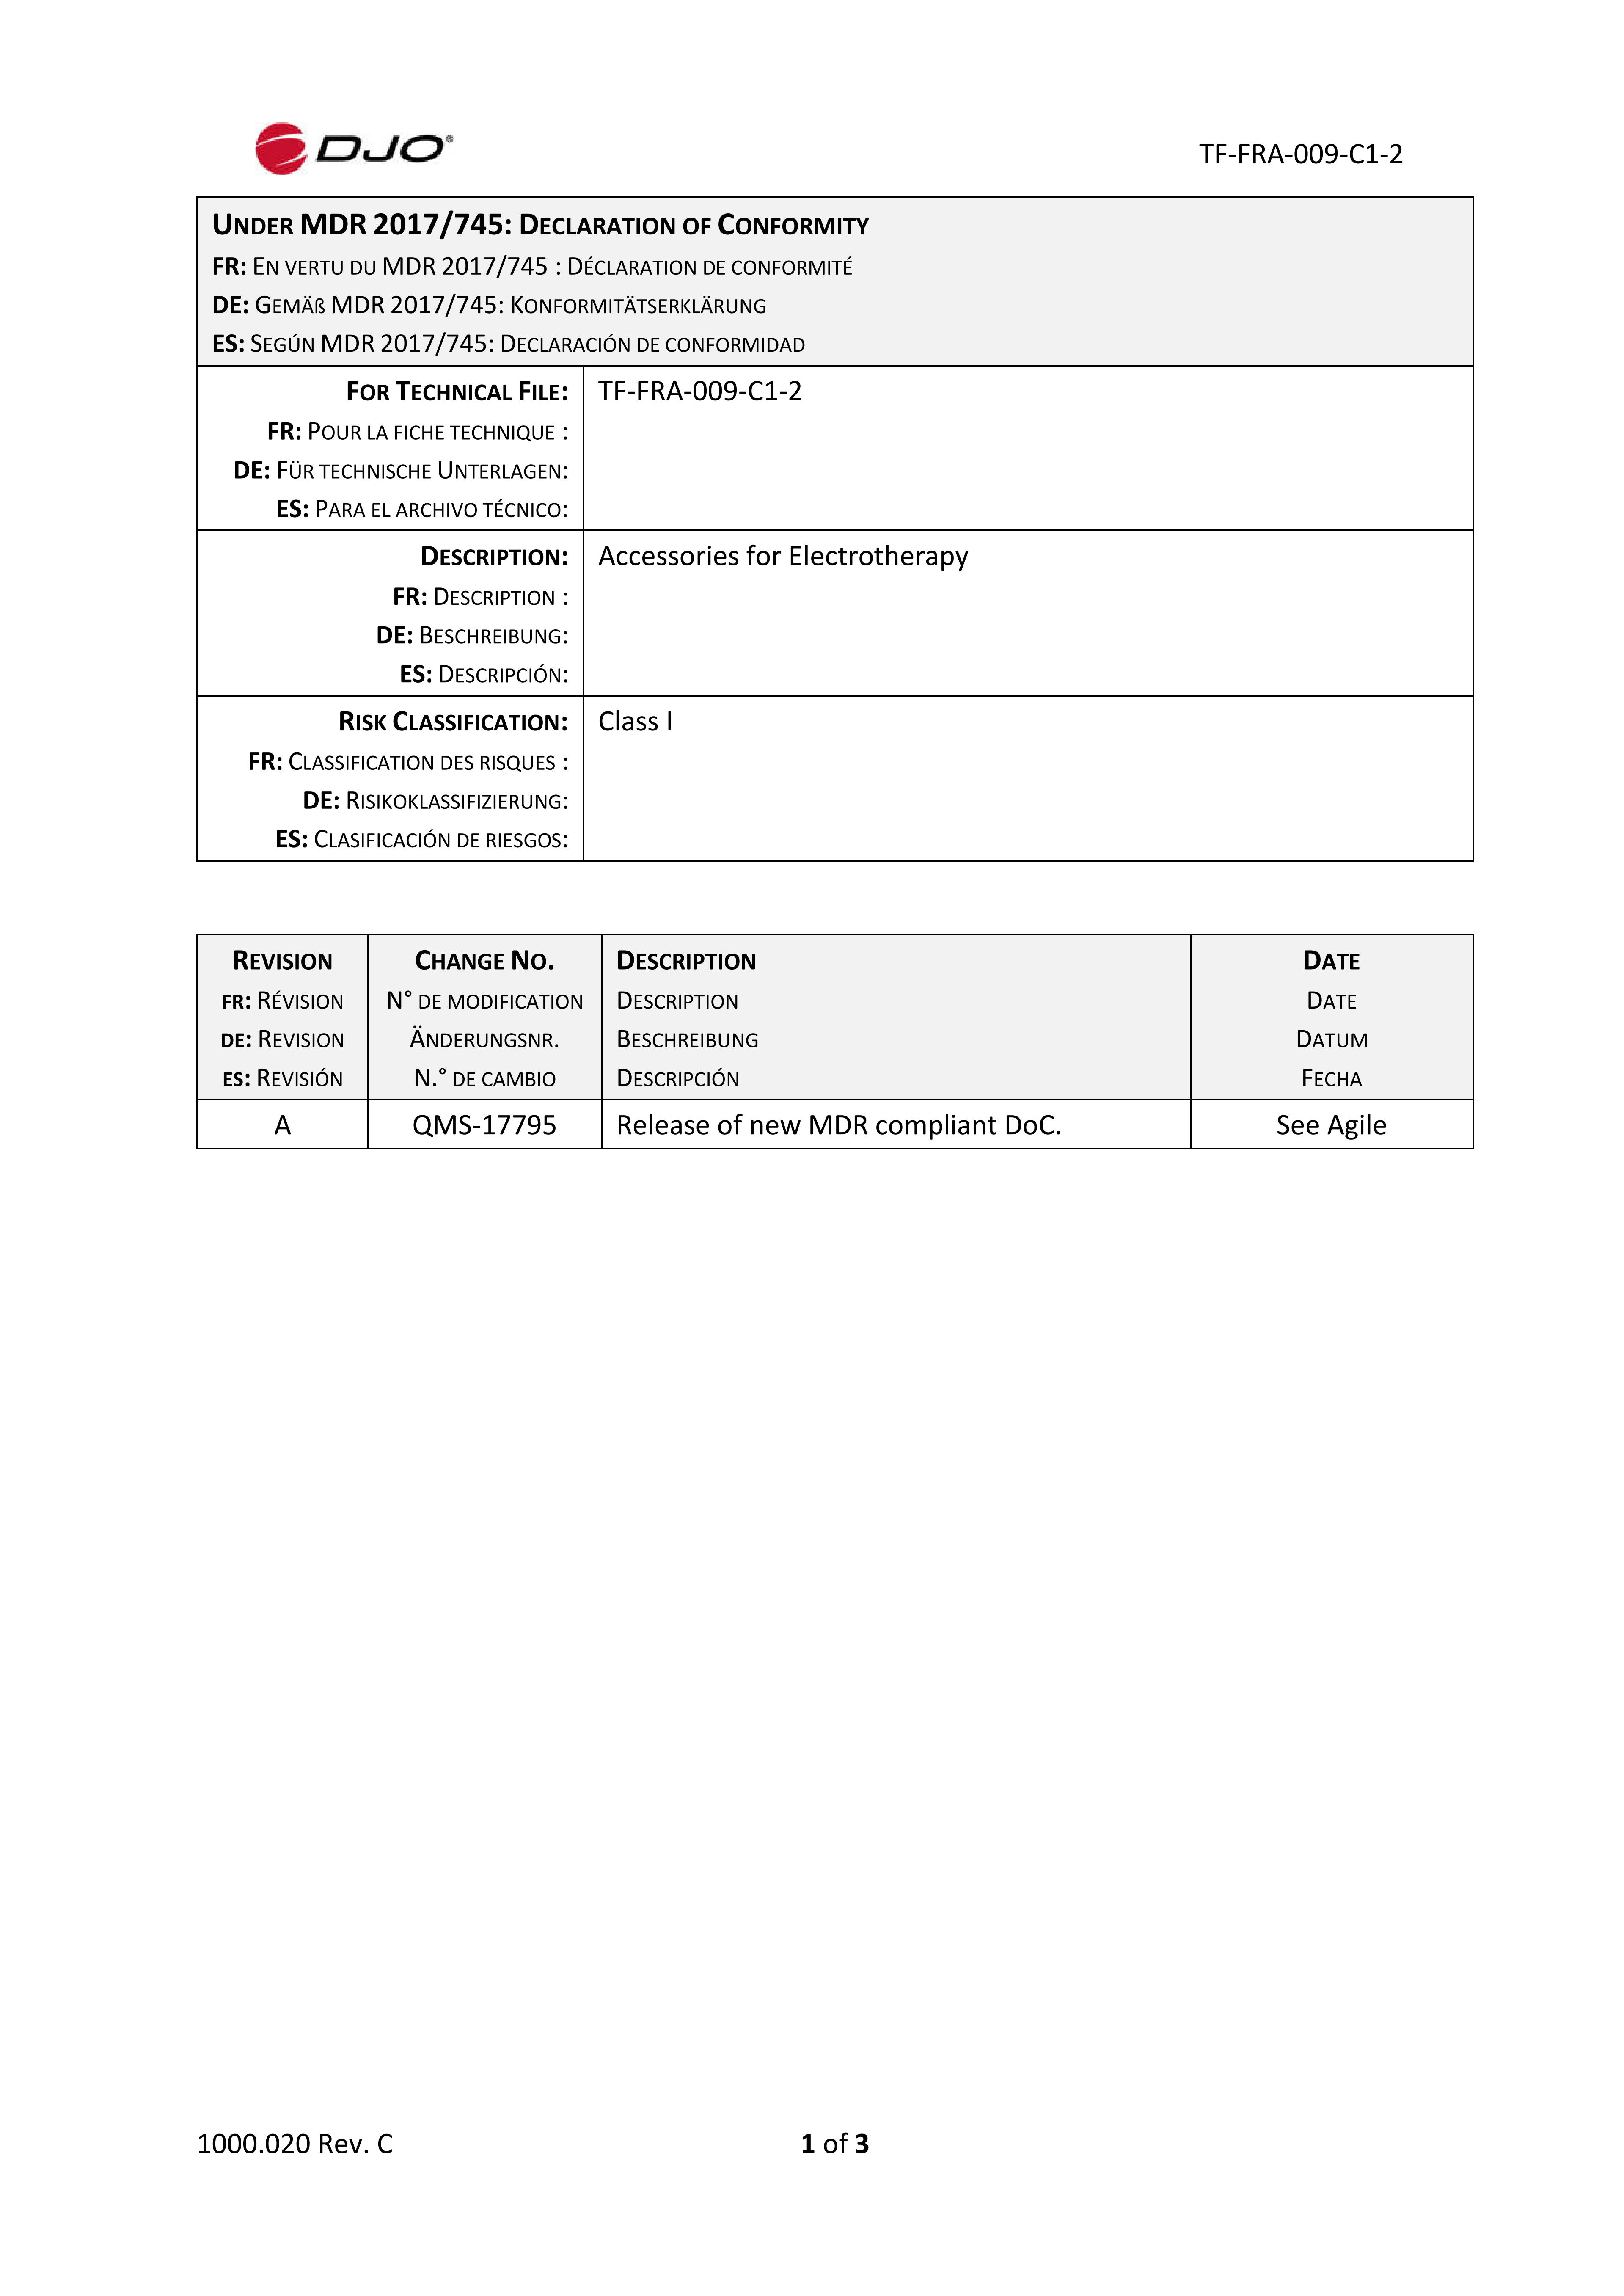 TF-FRA-009-C1-2_ ACCESSORIES FOR ELECTROTHERAPY DEVICES DOC_Rev A.pdf